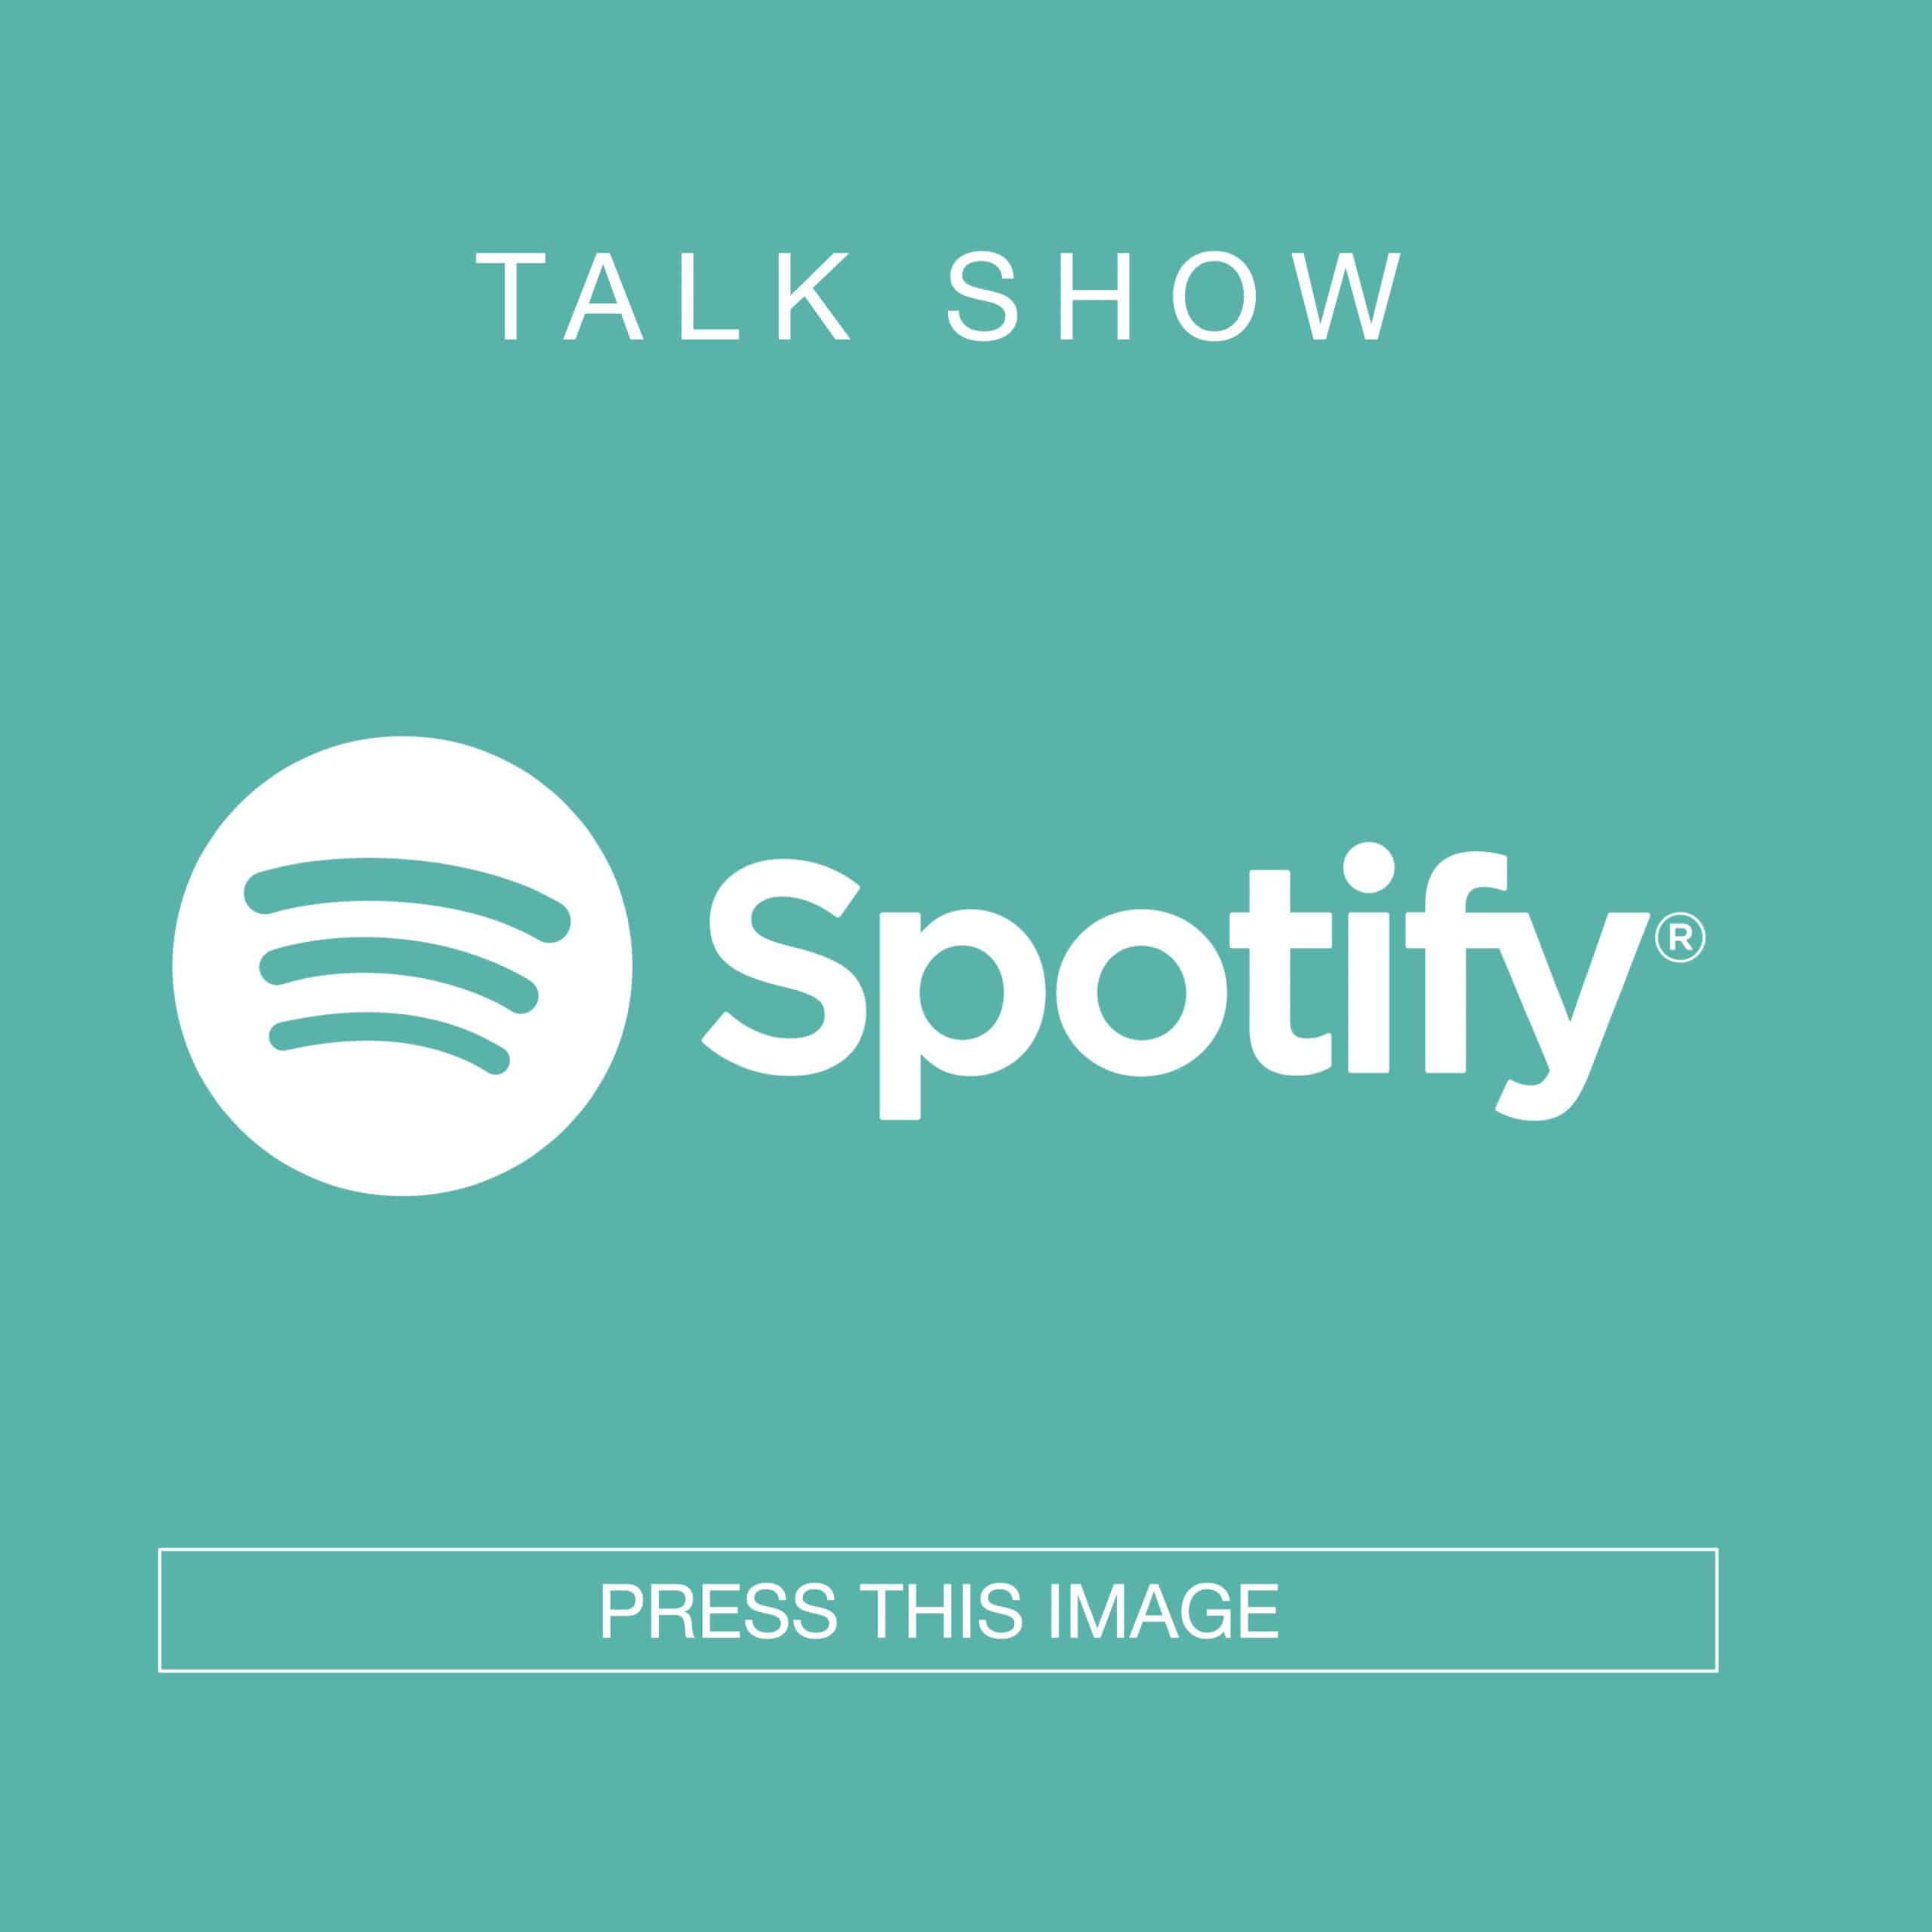 Spotify Talk Show website image with link - Networking Magazine.